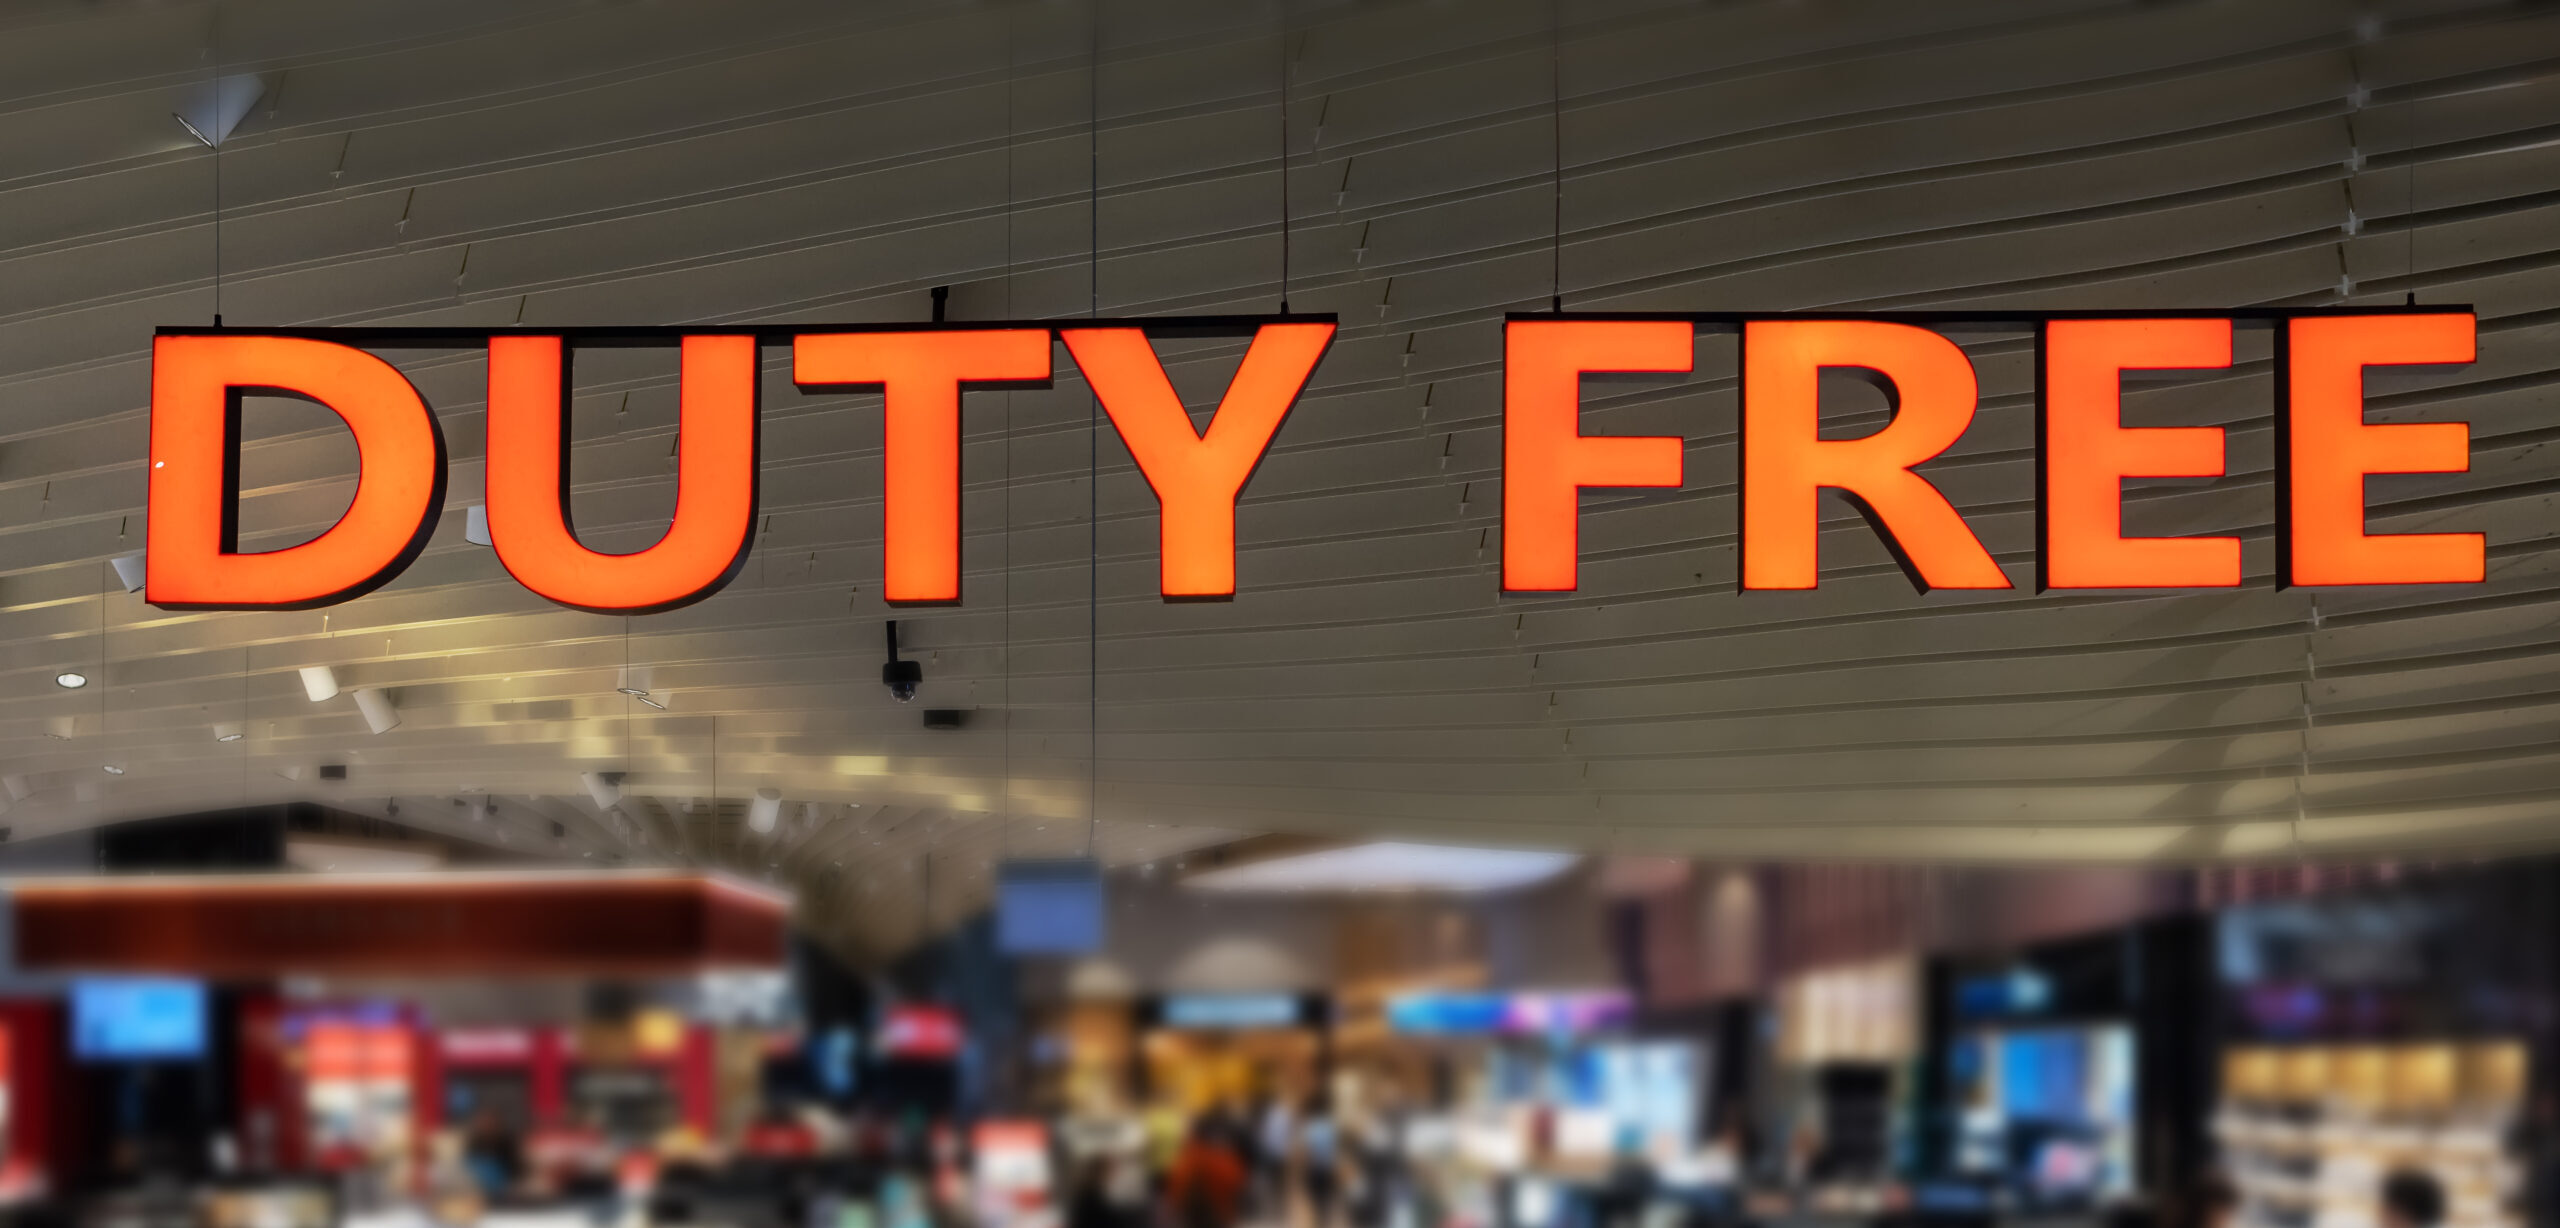 Duty Free and Travel Retail Market Trends, Size & Report